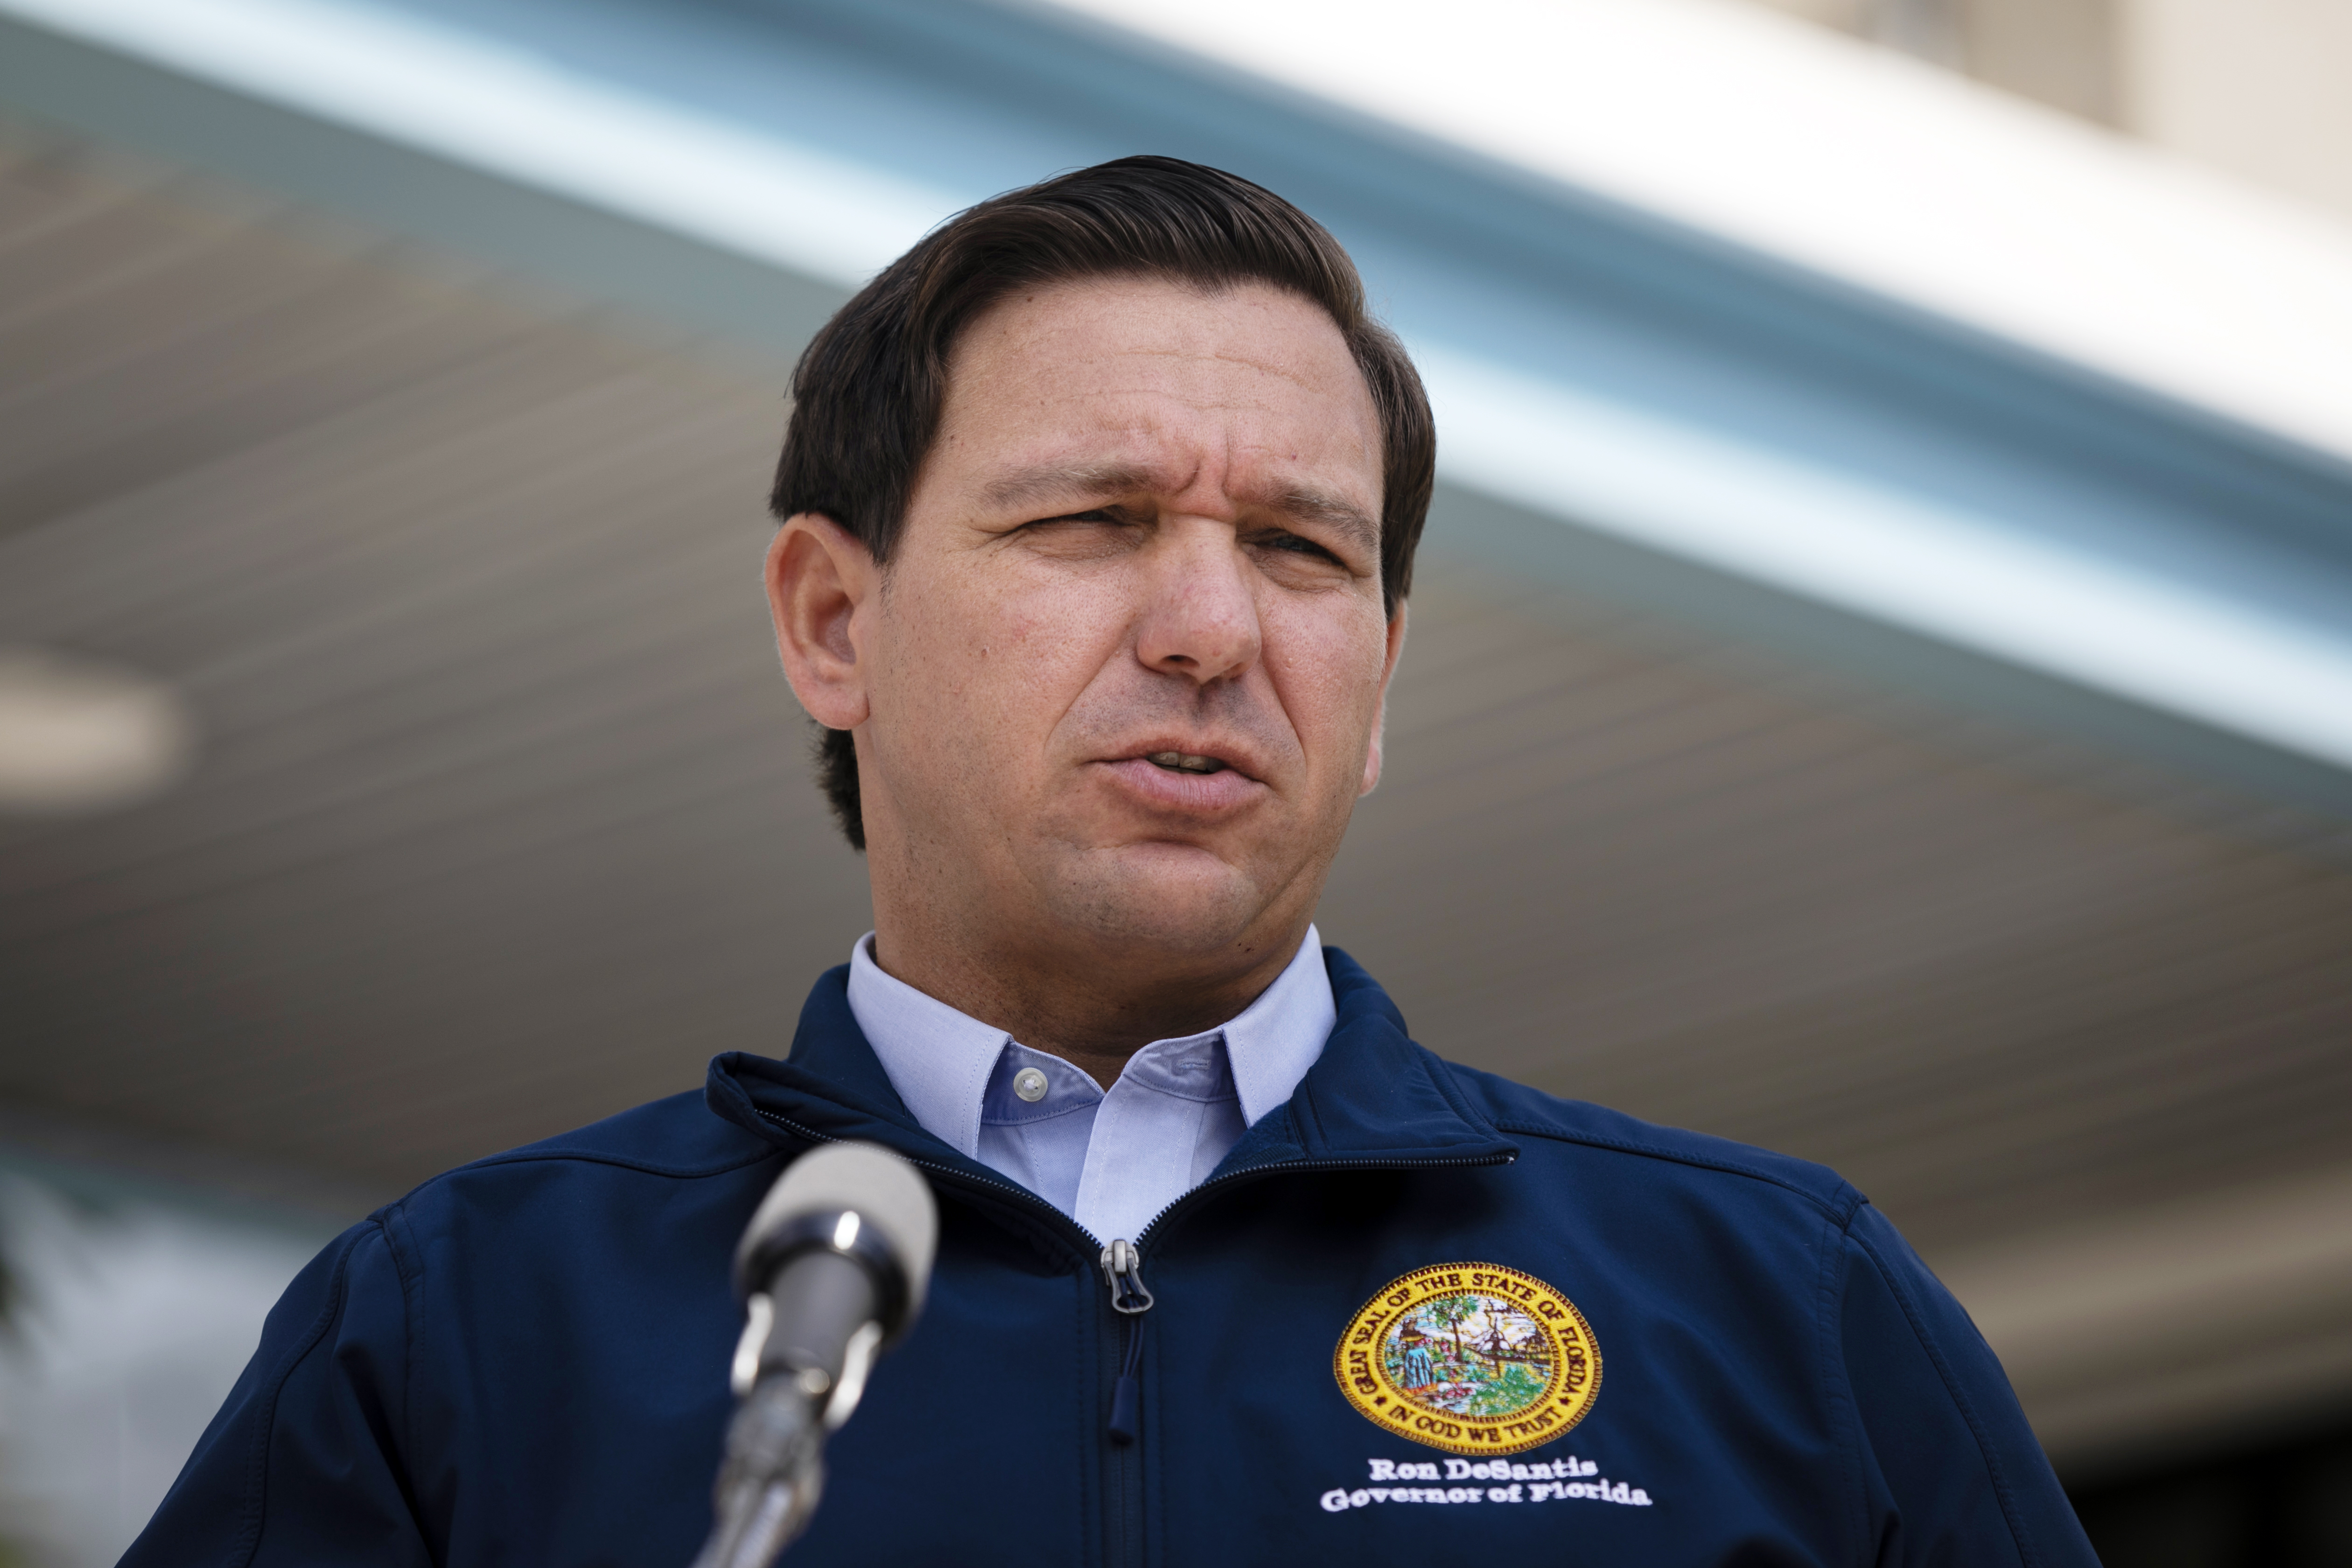 MIAMI, FL - AUGUST 29: Governor Ron DeSantis gives a briefing regarding Hurricane Dorian to the media at National Hurricane Center on August 29, 2019 in Miami, Florida. Hurricane Dorian is expected to become a Category 4 as it approaches Florida in the upcoming days. (Photo by Eva Marie Uzcategui/Getty Images)